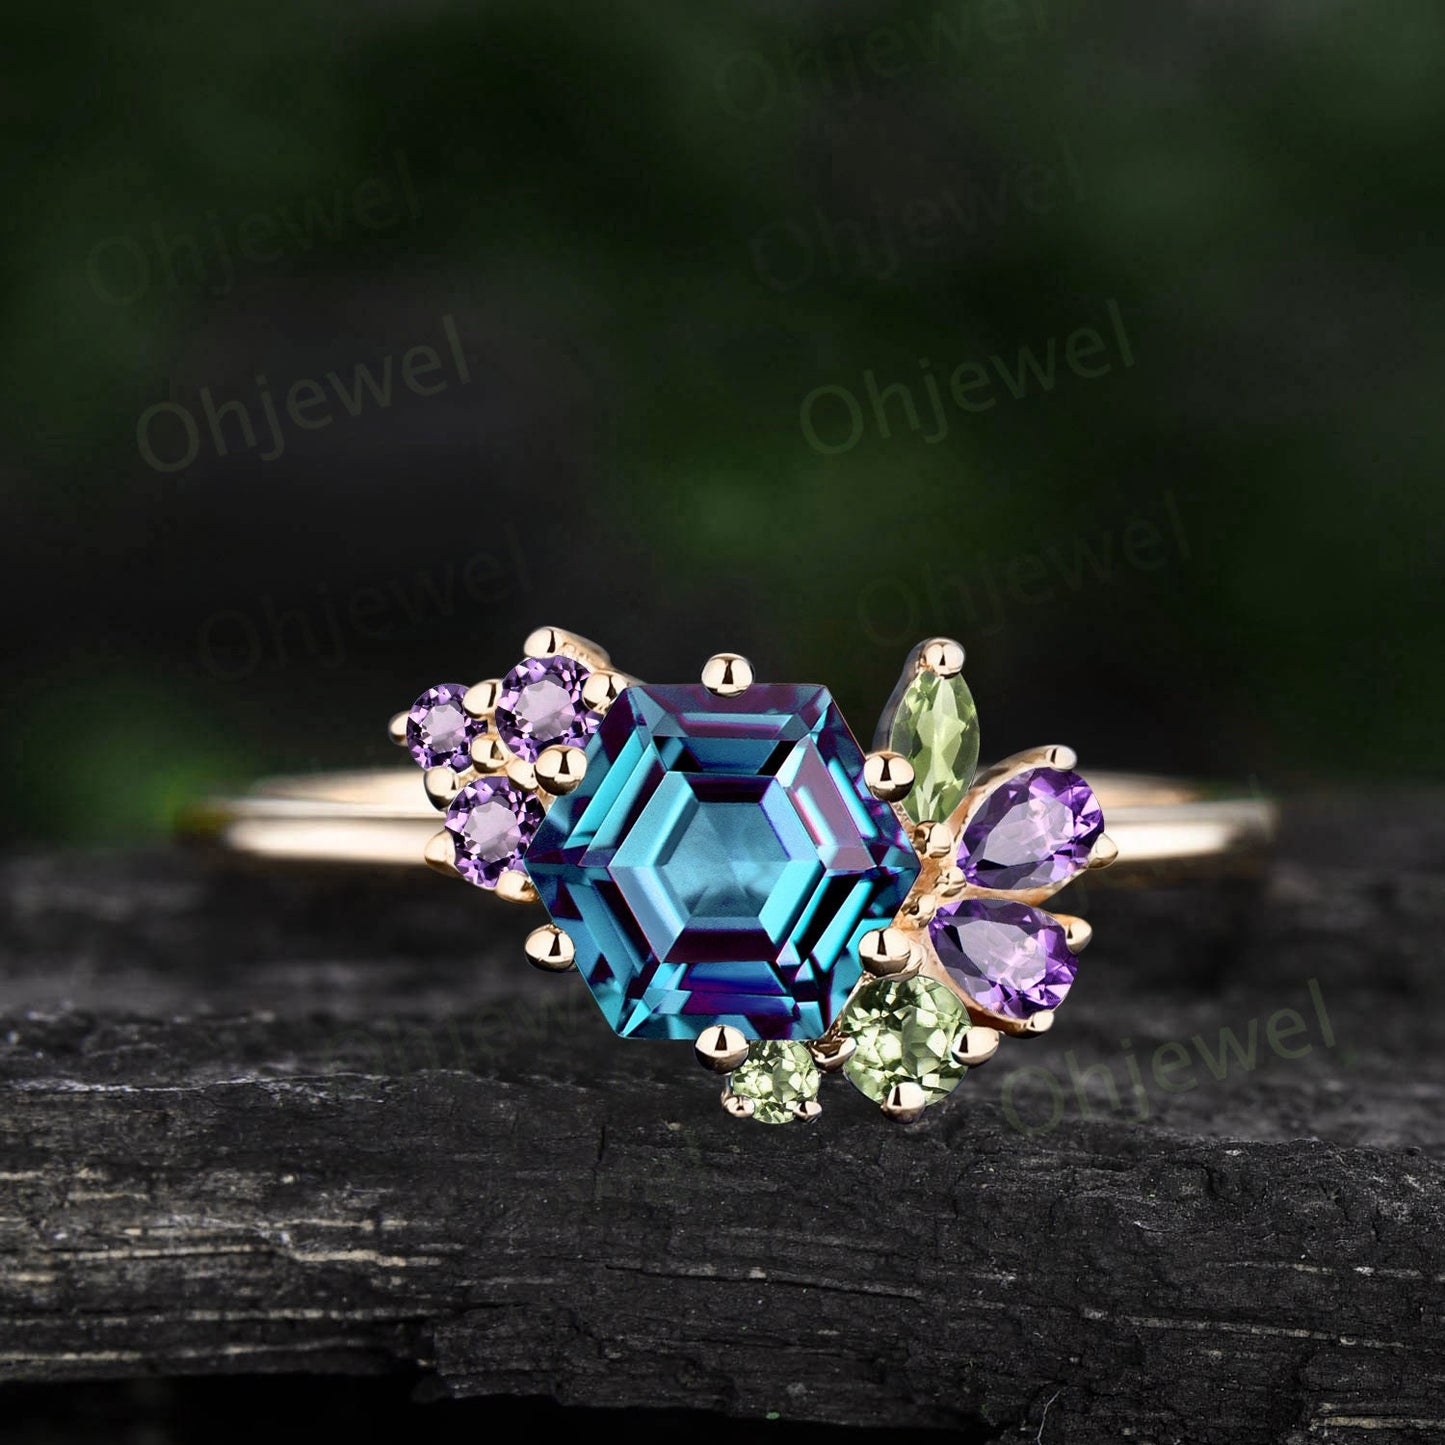 Vintage Hexagon cut alexandrite engagement ring cluster amethyst peridot ring solid 14k white gold women unique dainty anniversary ring gift